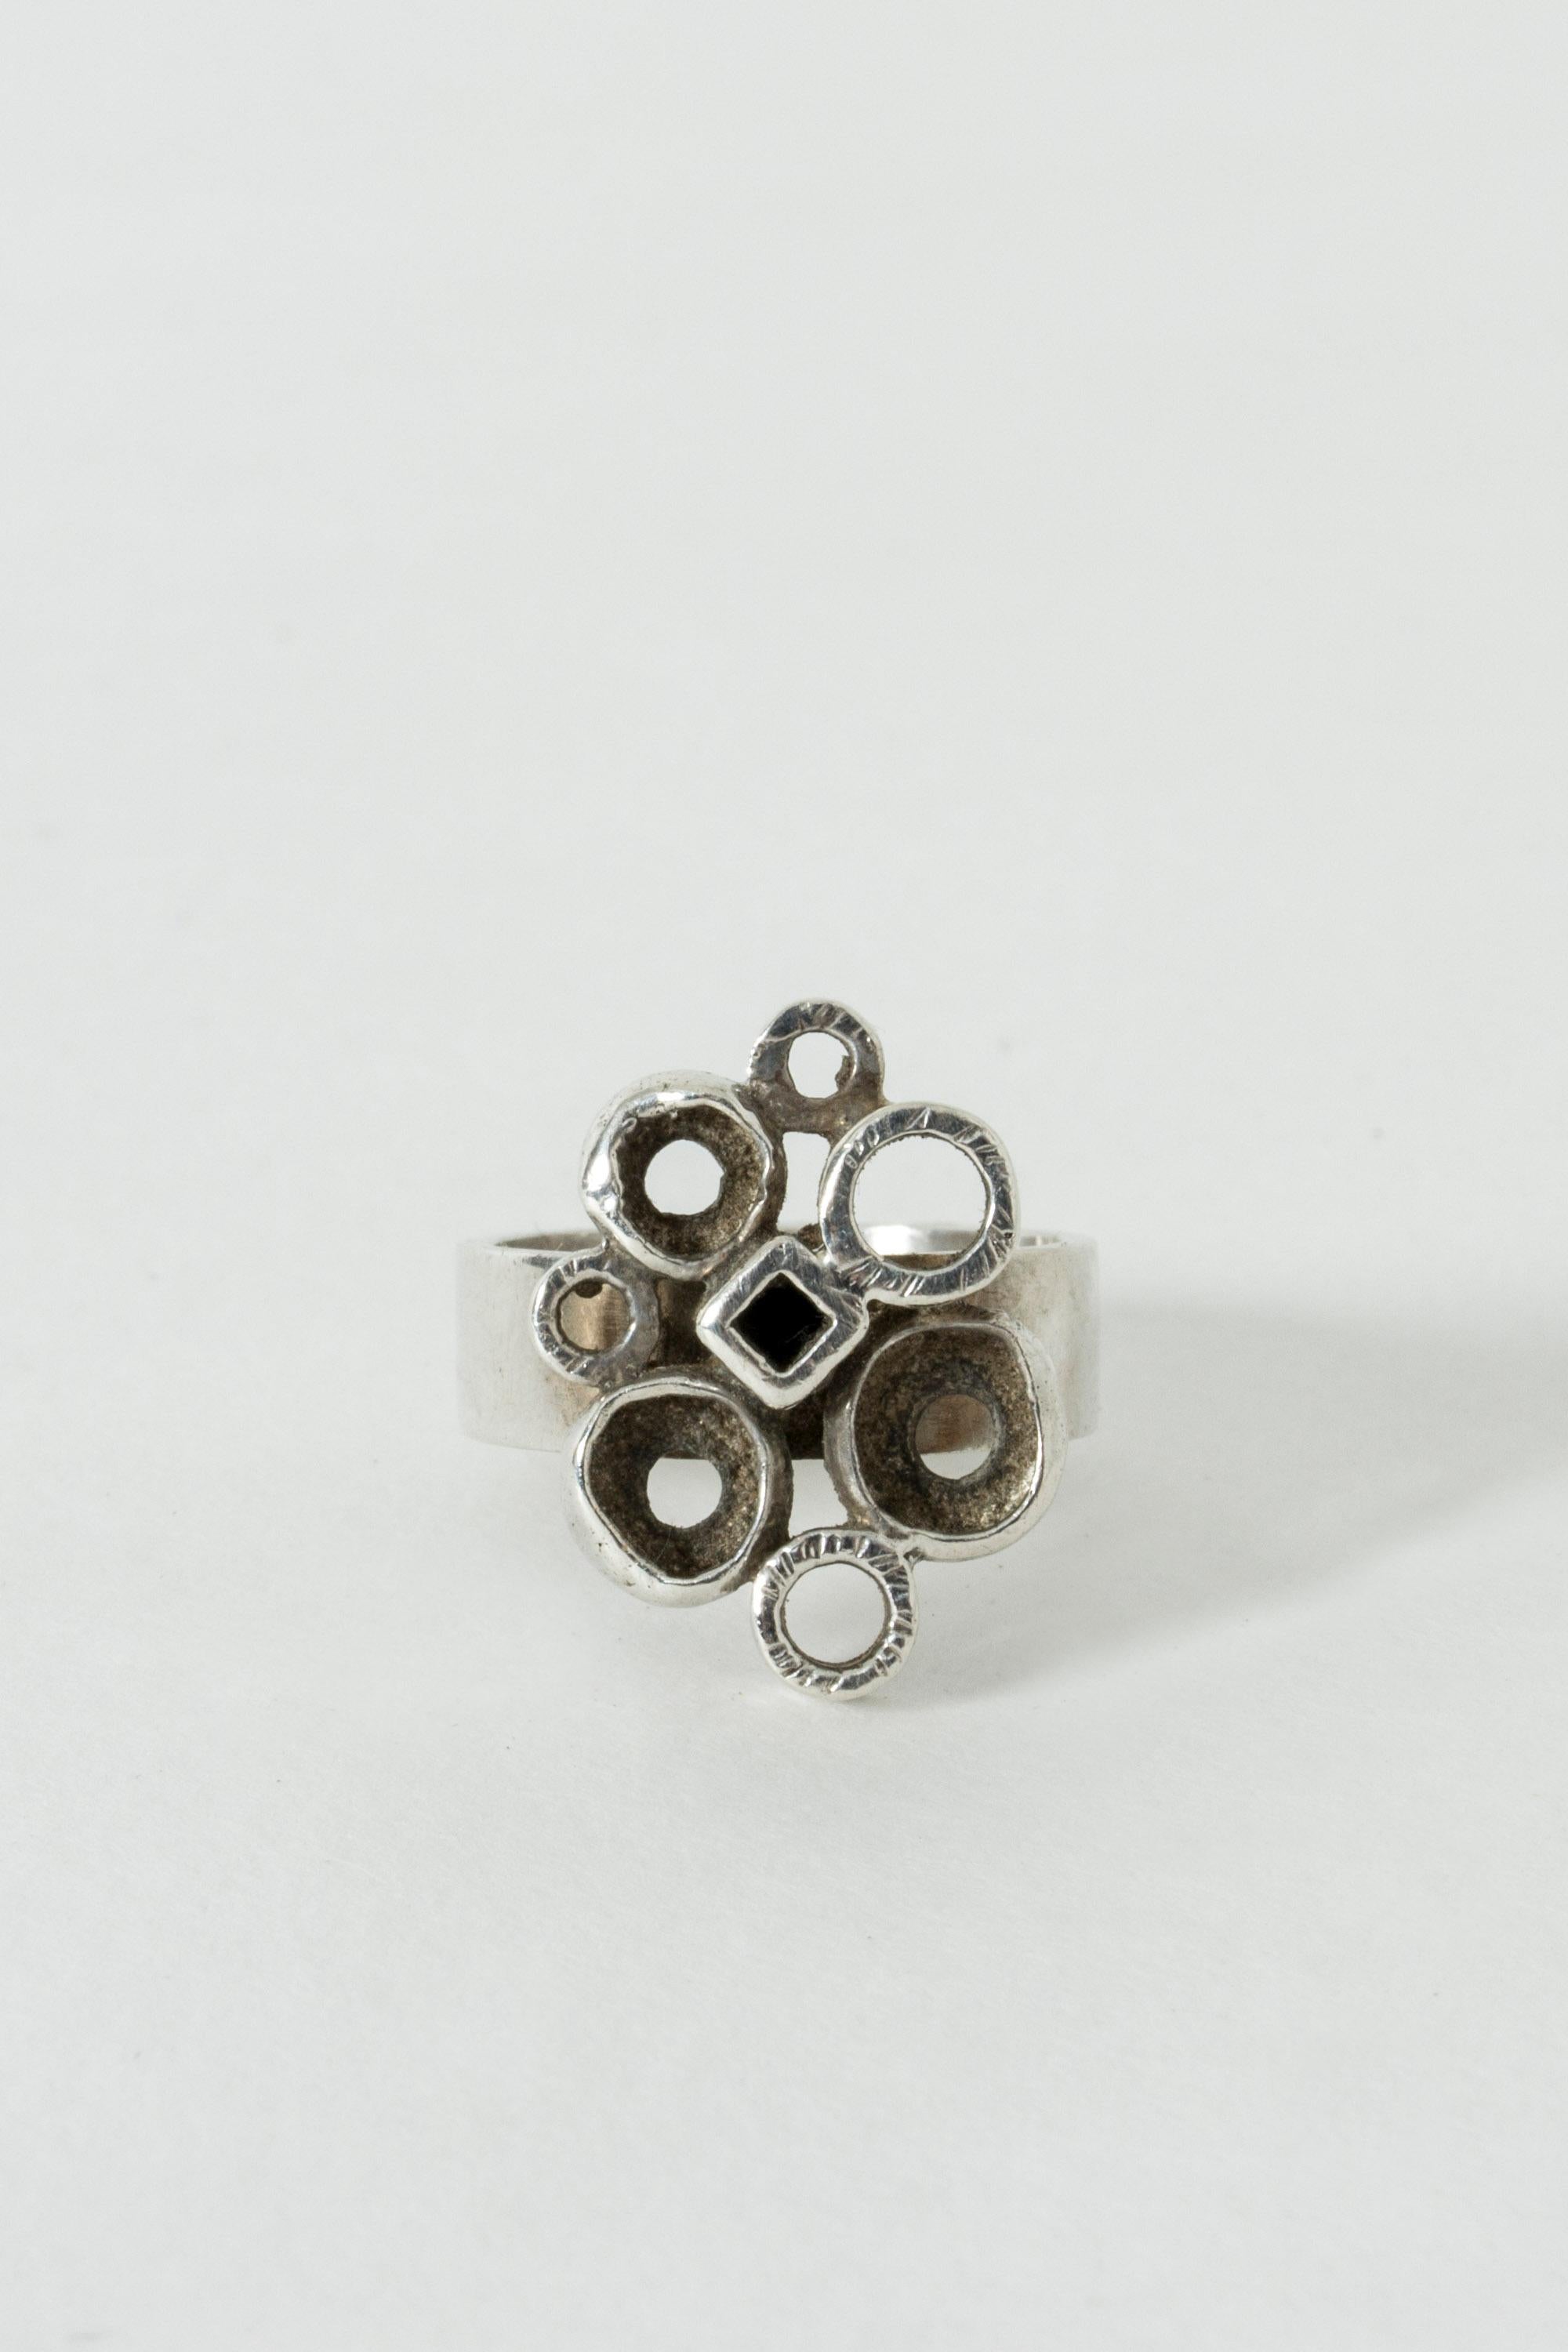 Cool silver ring by Isaac Cohen, adorned with a cluster of spheres and a cube. The different sizes and levels of the forms create an interesting, dynamic effect.